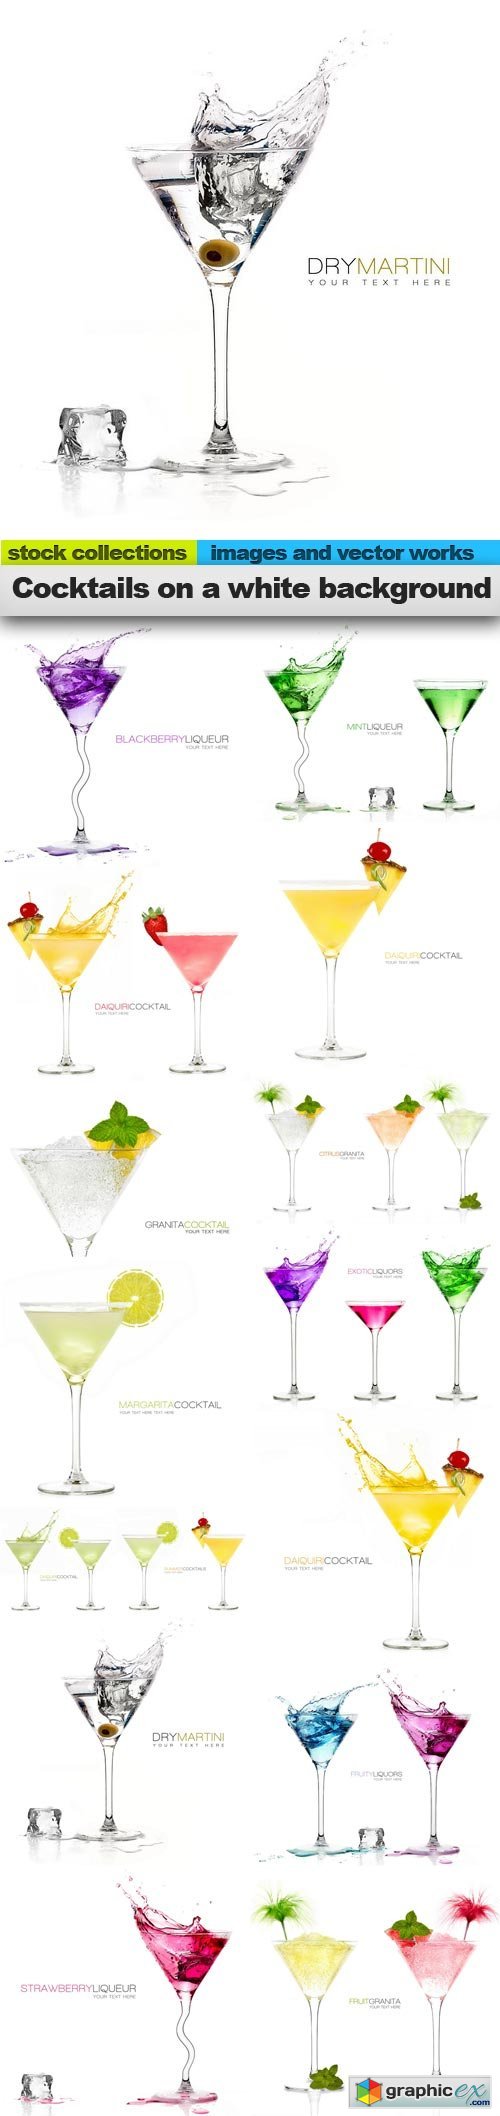 Cocktails on a white background, 15 x UHQ JPEG